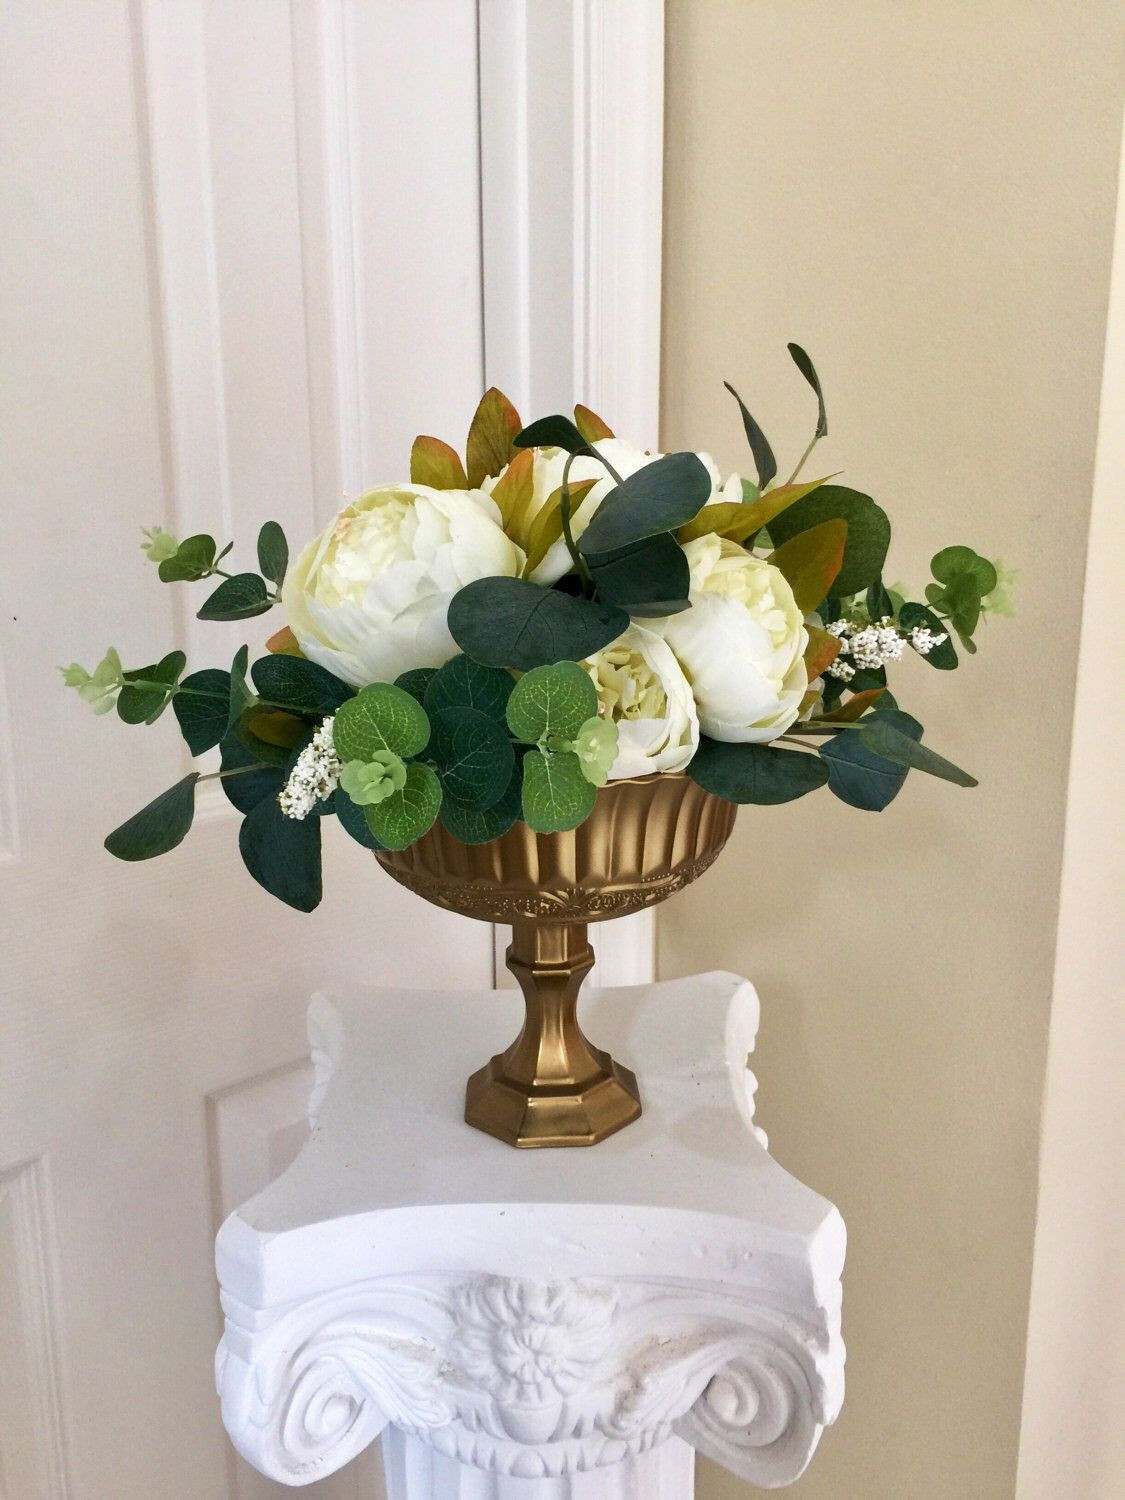 24 Stylish Pedestal Flower Vase 2024 free download pedestal flower vase of pedestal flower vase gallery a personal favorite from my etsy shop within pedestal flower vase gallery a personal favorite from my etsy shop of pedestal flower vase g